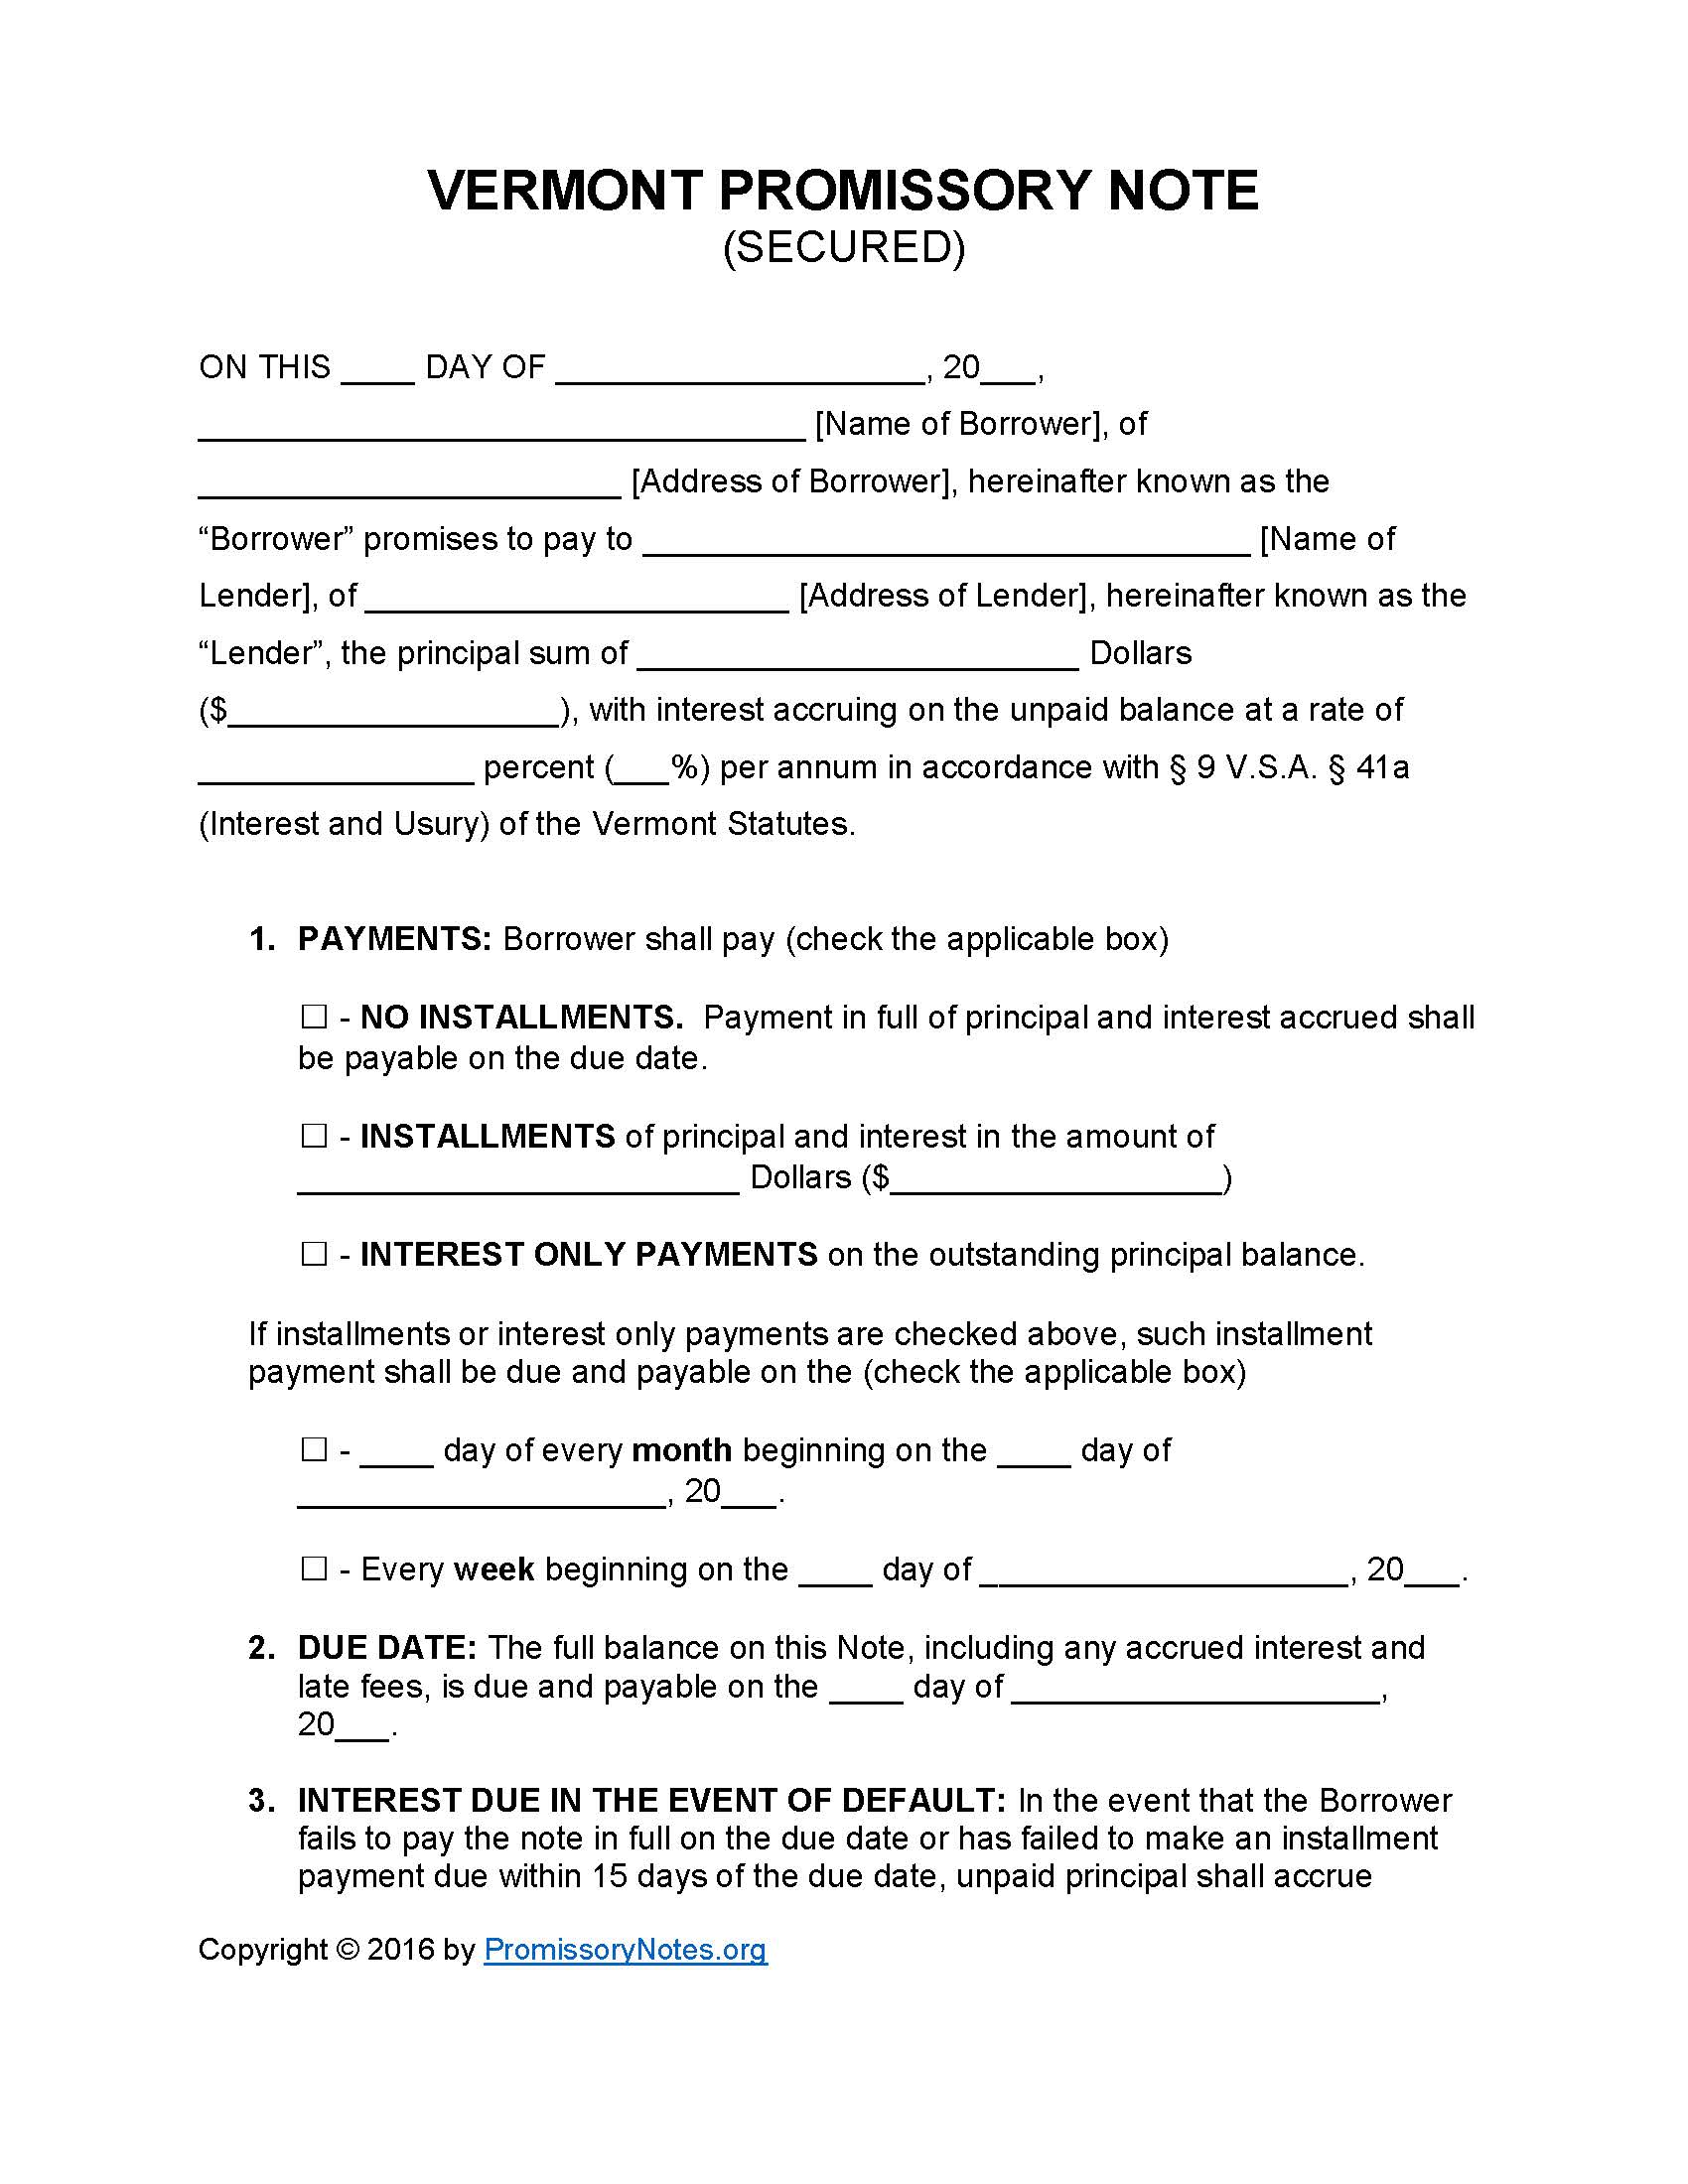 vermont-secured-promissory-note-form